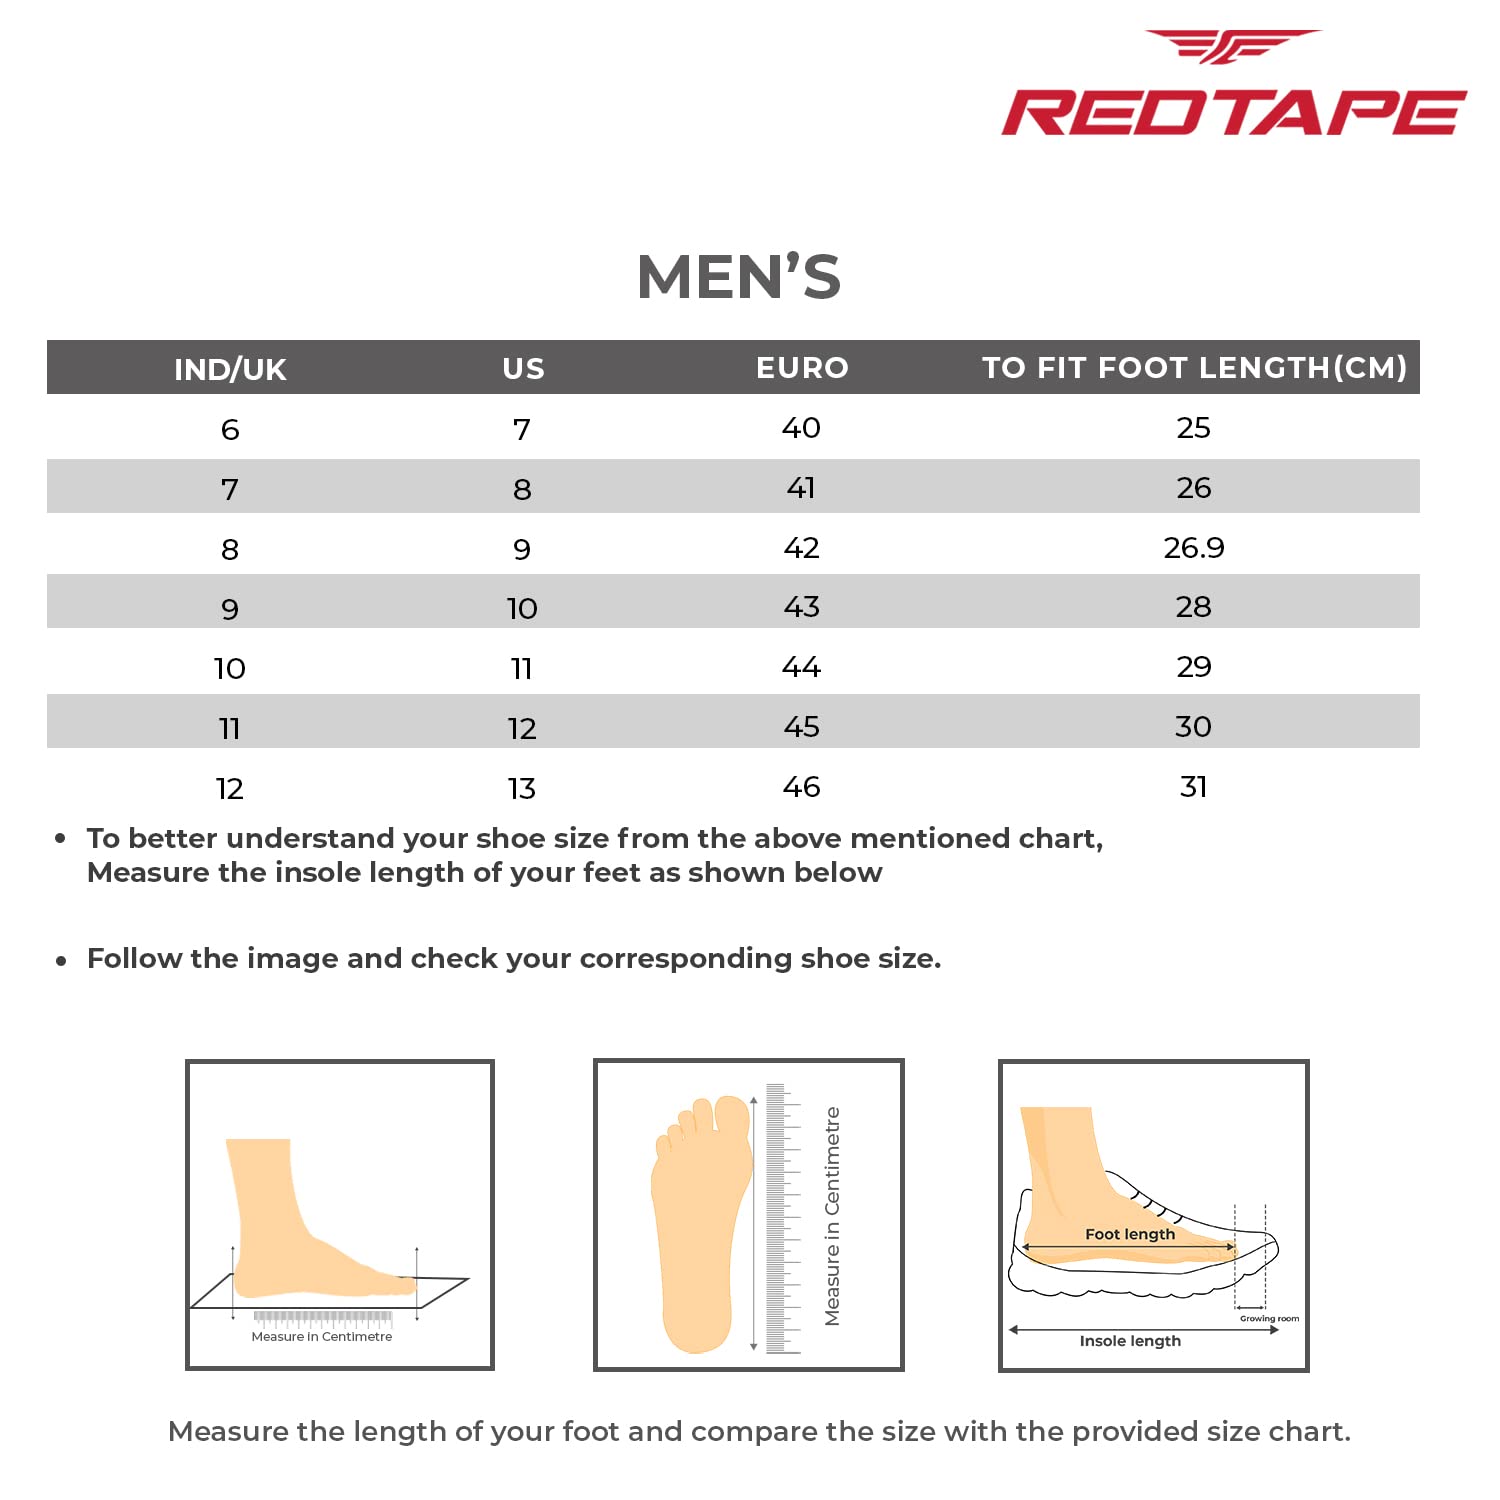 Red Tape Sneaker Casual Shoes for Men | Soft Cushioned Insole, Slip-Resistance, Dynamic Feet Support, Arch Support & Shock Absorption